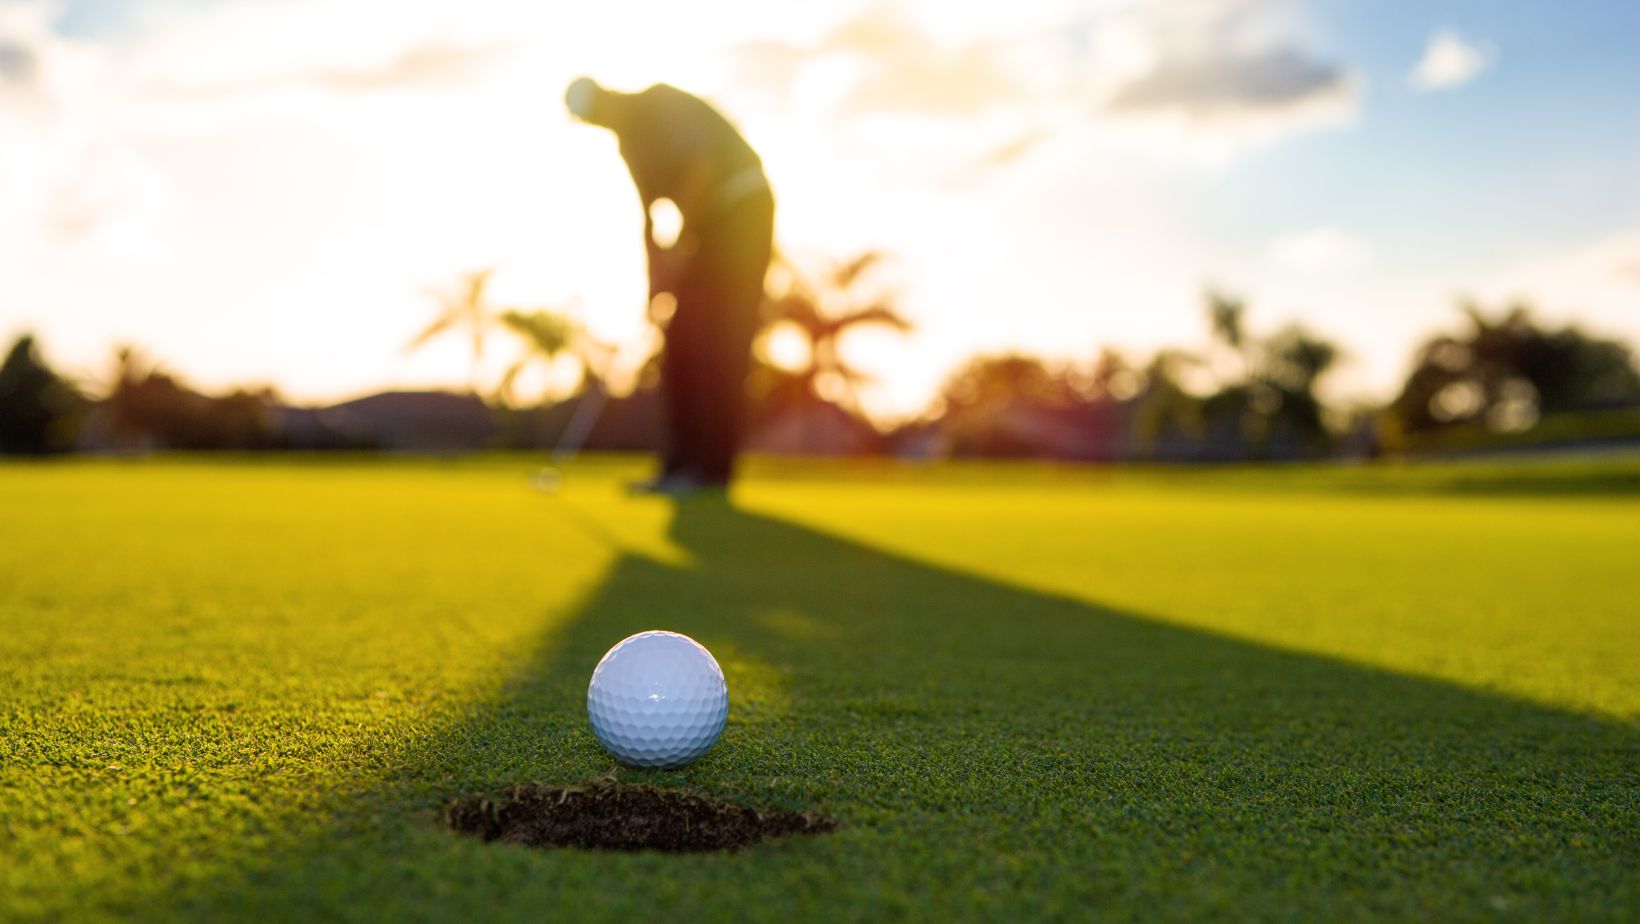 The Benefits of Owning an Indoor Putting Green